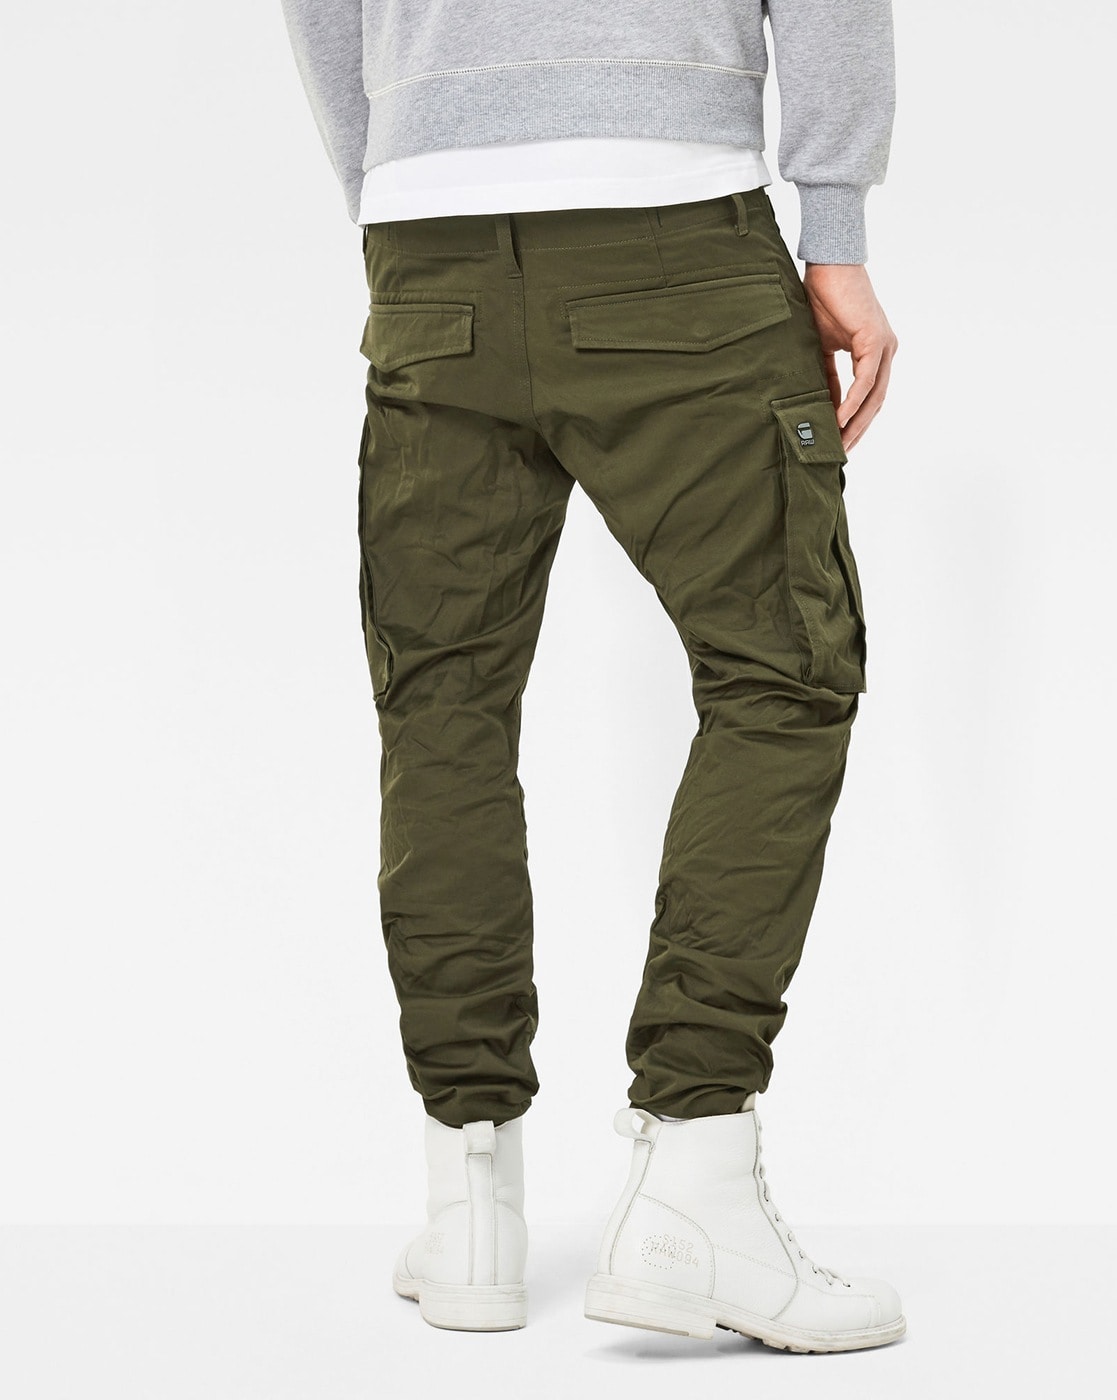 Buy G Star Raw Pants Online In India